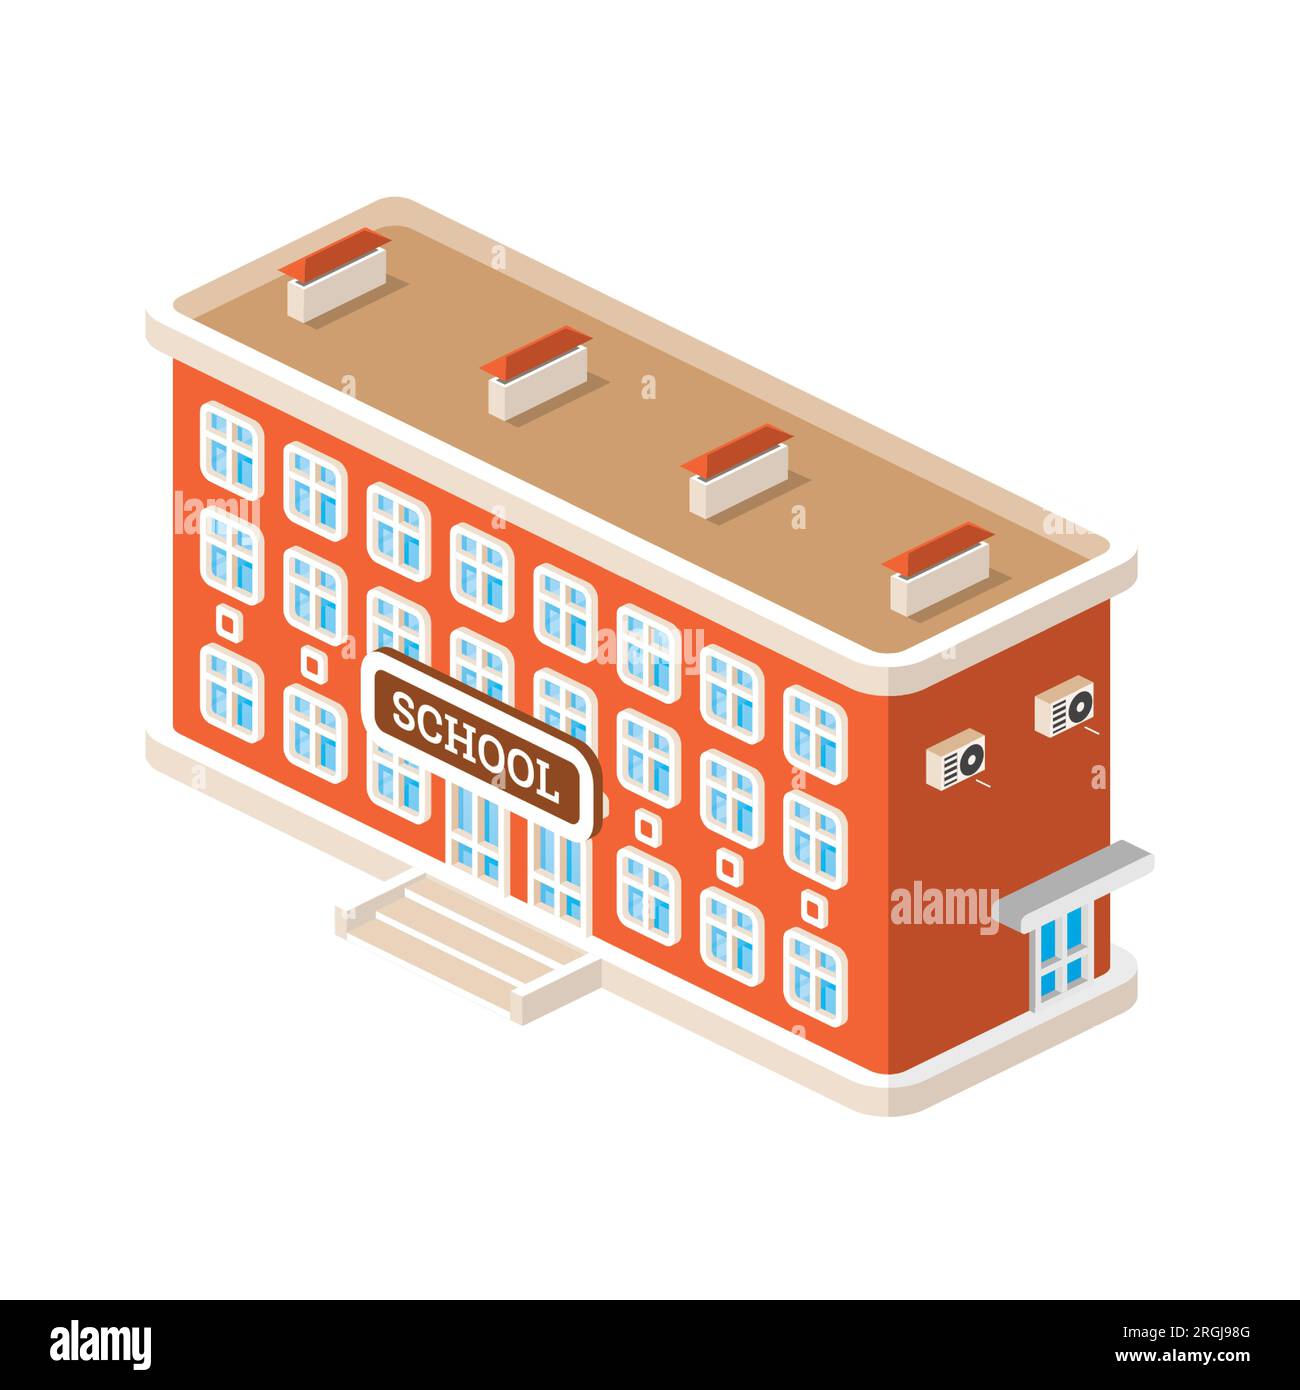 Isometric school building isolated on white background. Vector illustration. Stock Vector